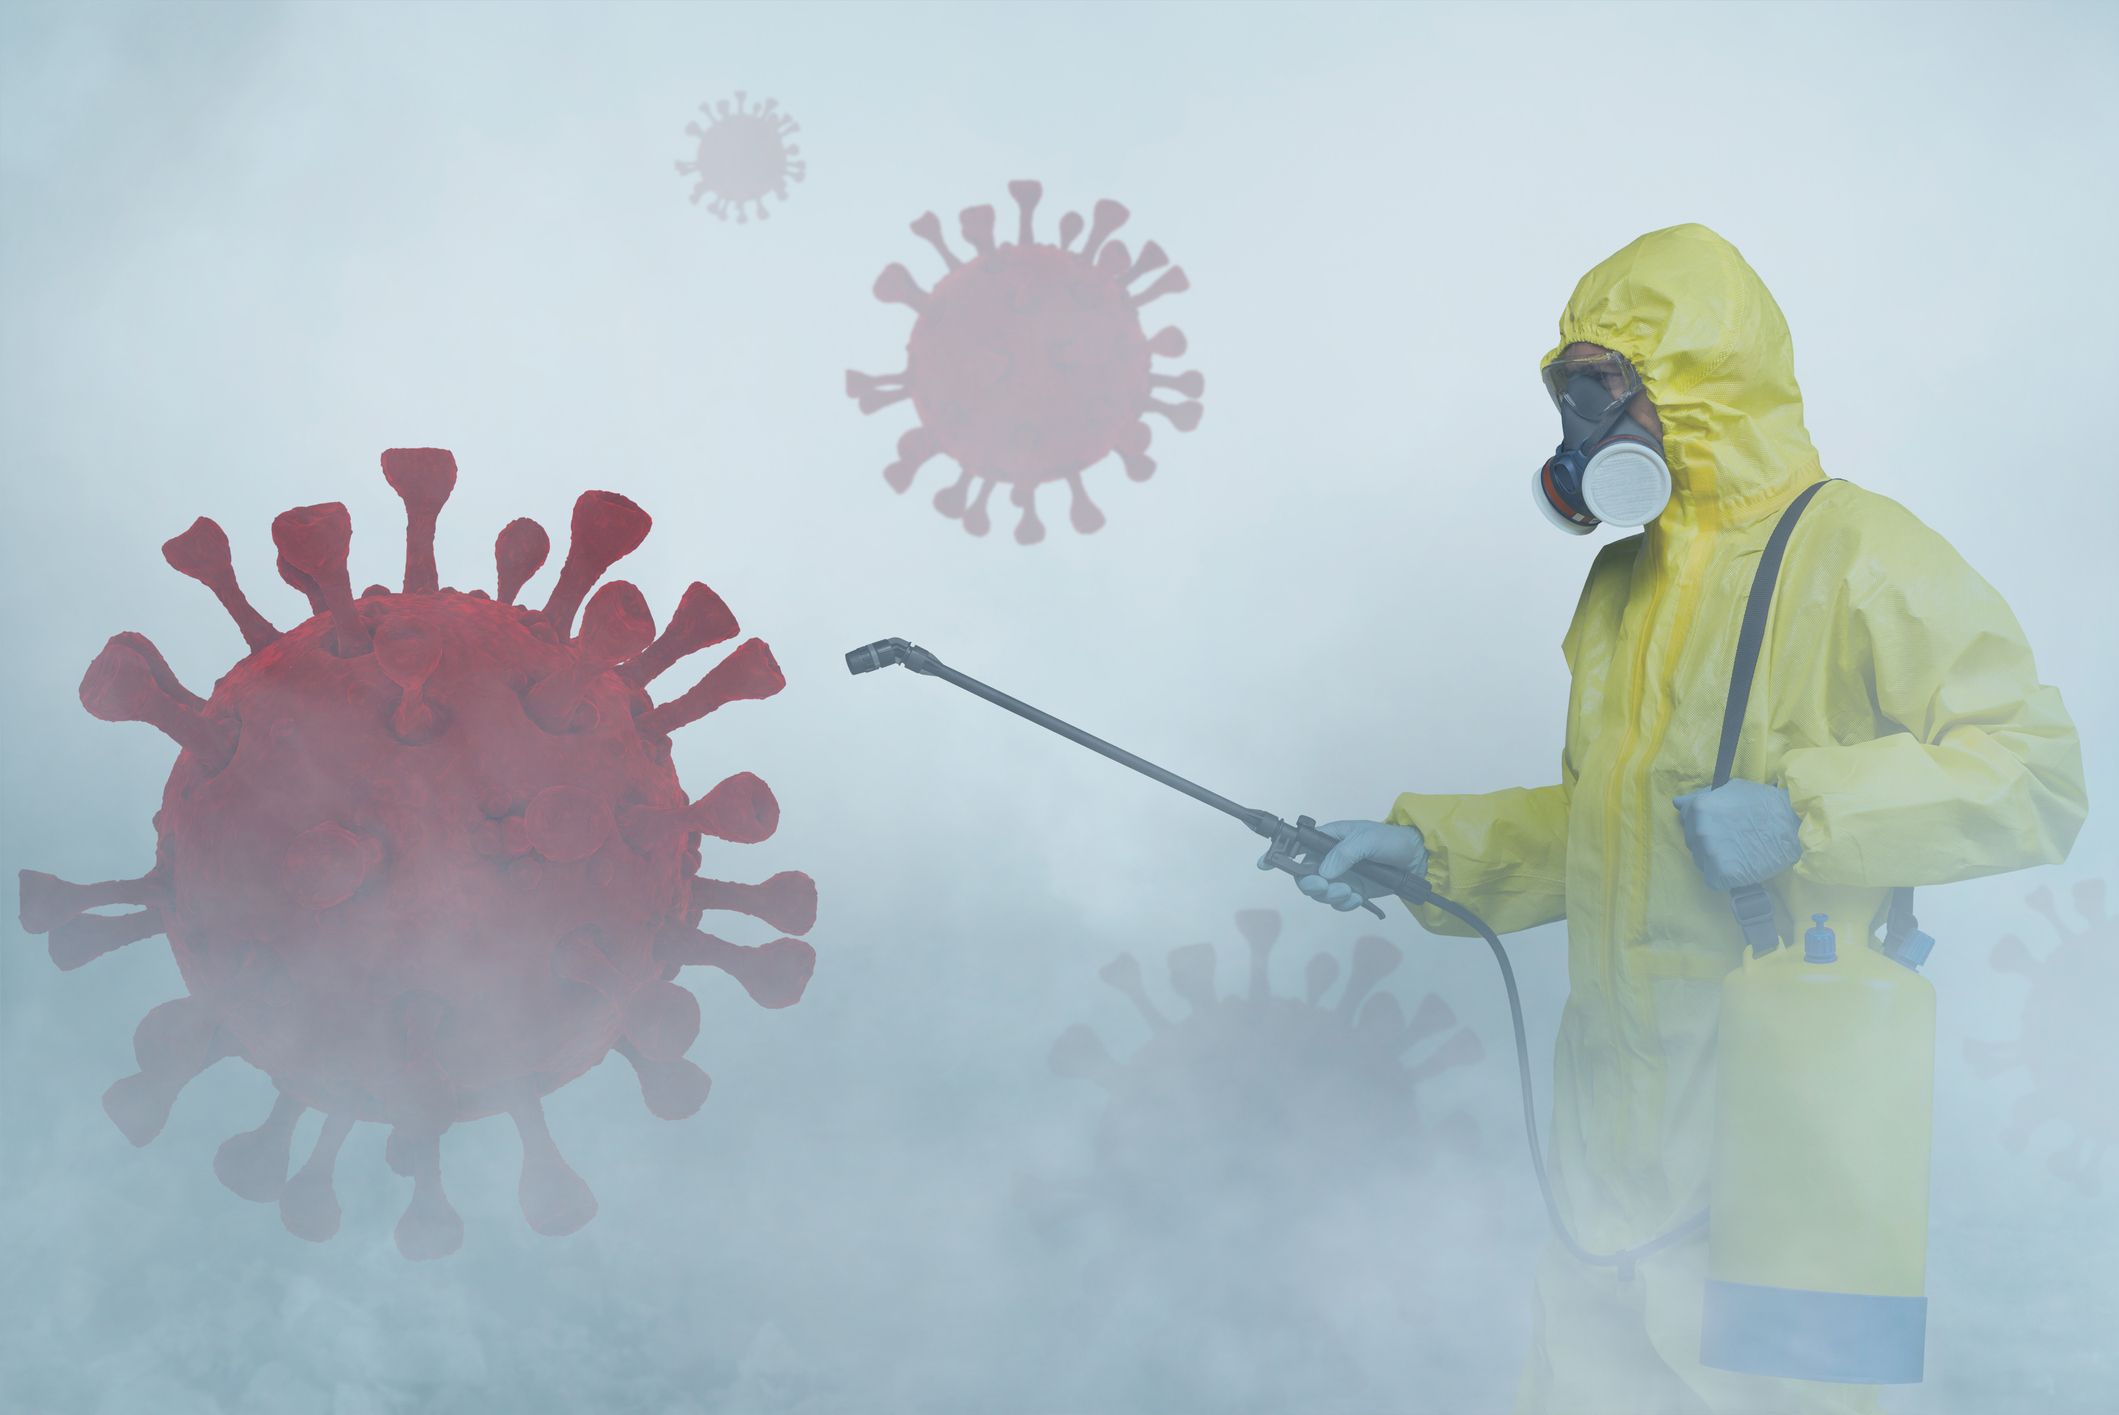 BioHazard Cleanup During Covid19